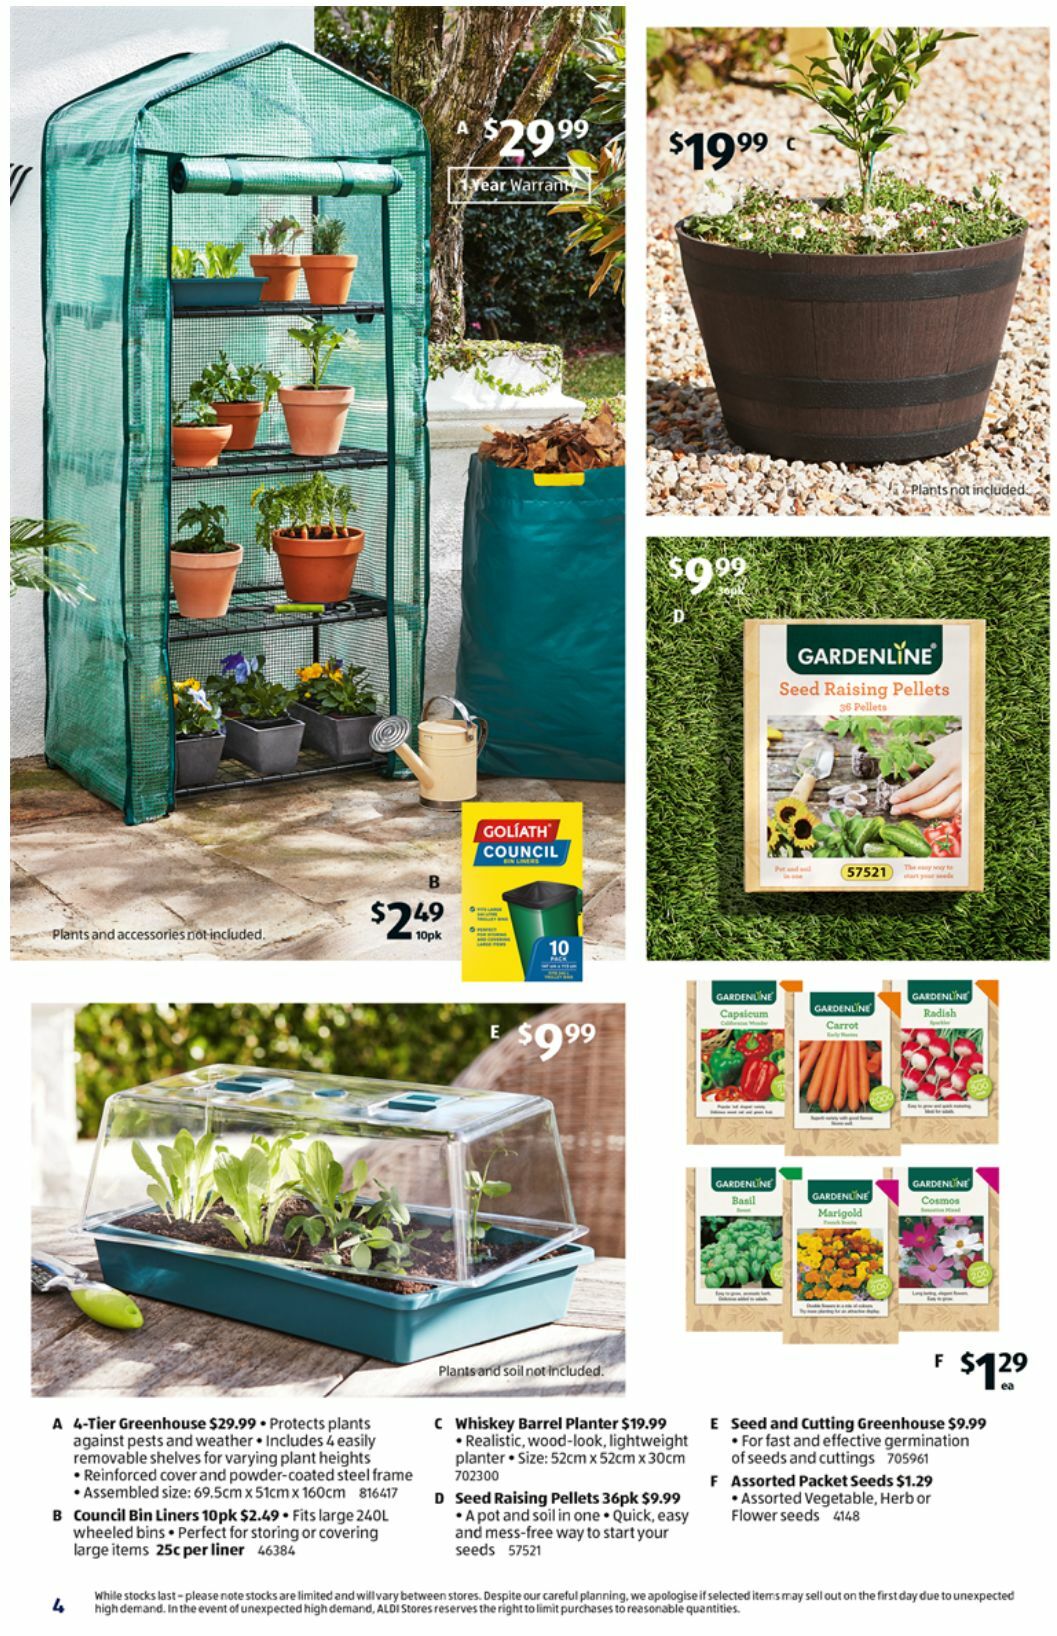 ALDI Catalogues from 7 September